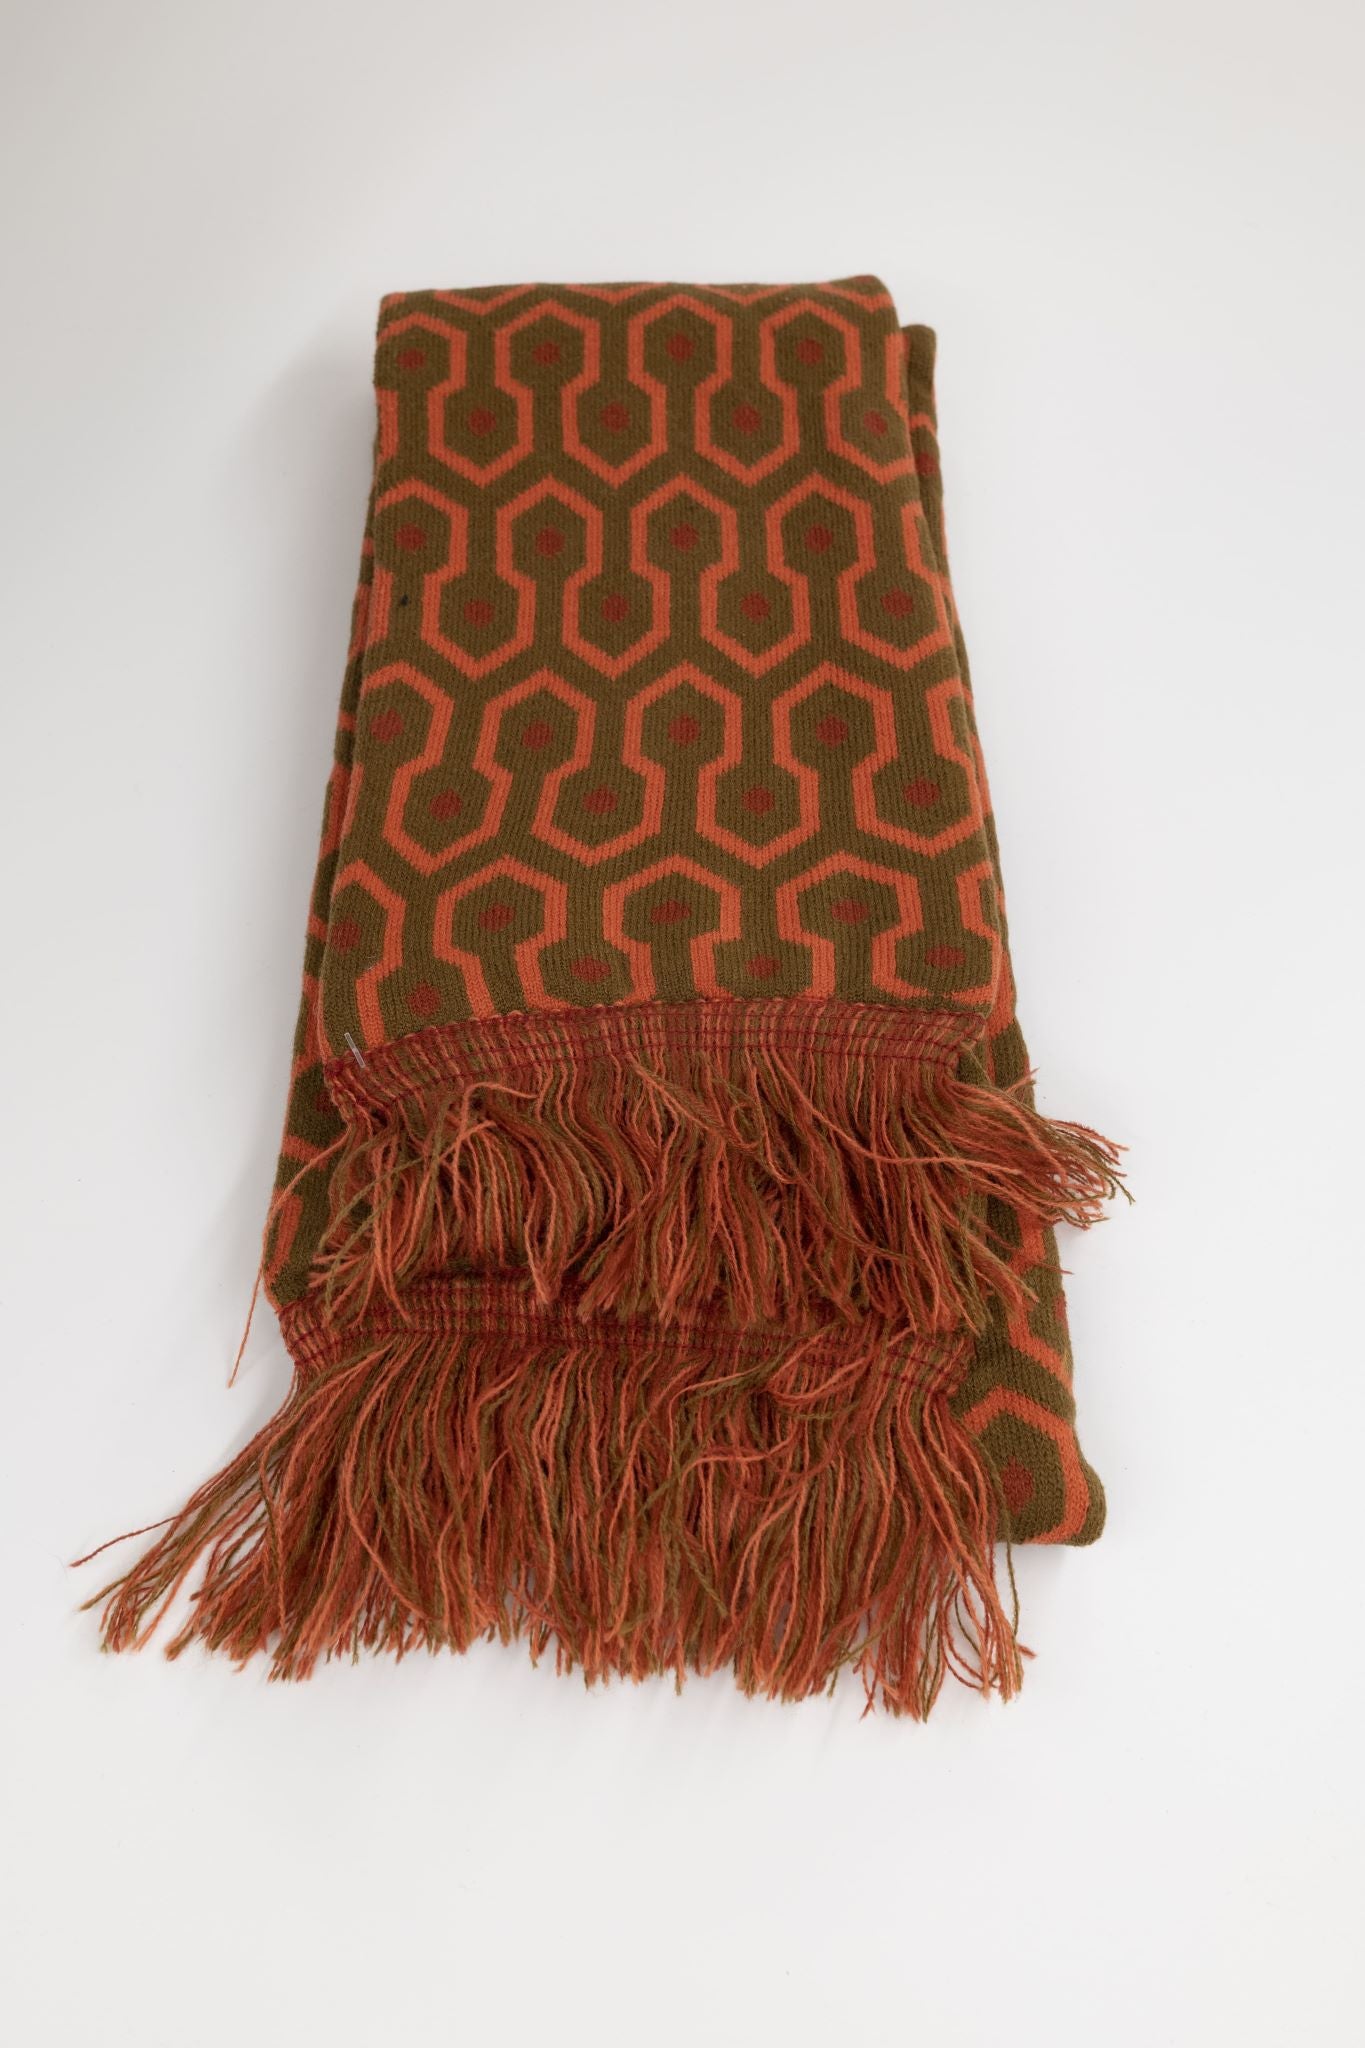 The Shining Overlook Hotel Carpet Scarf